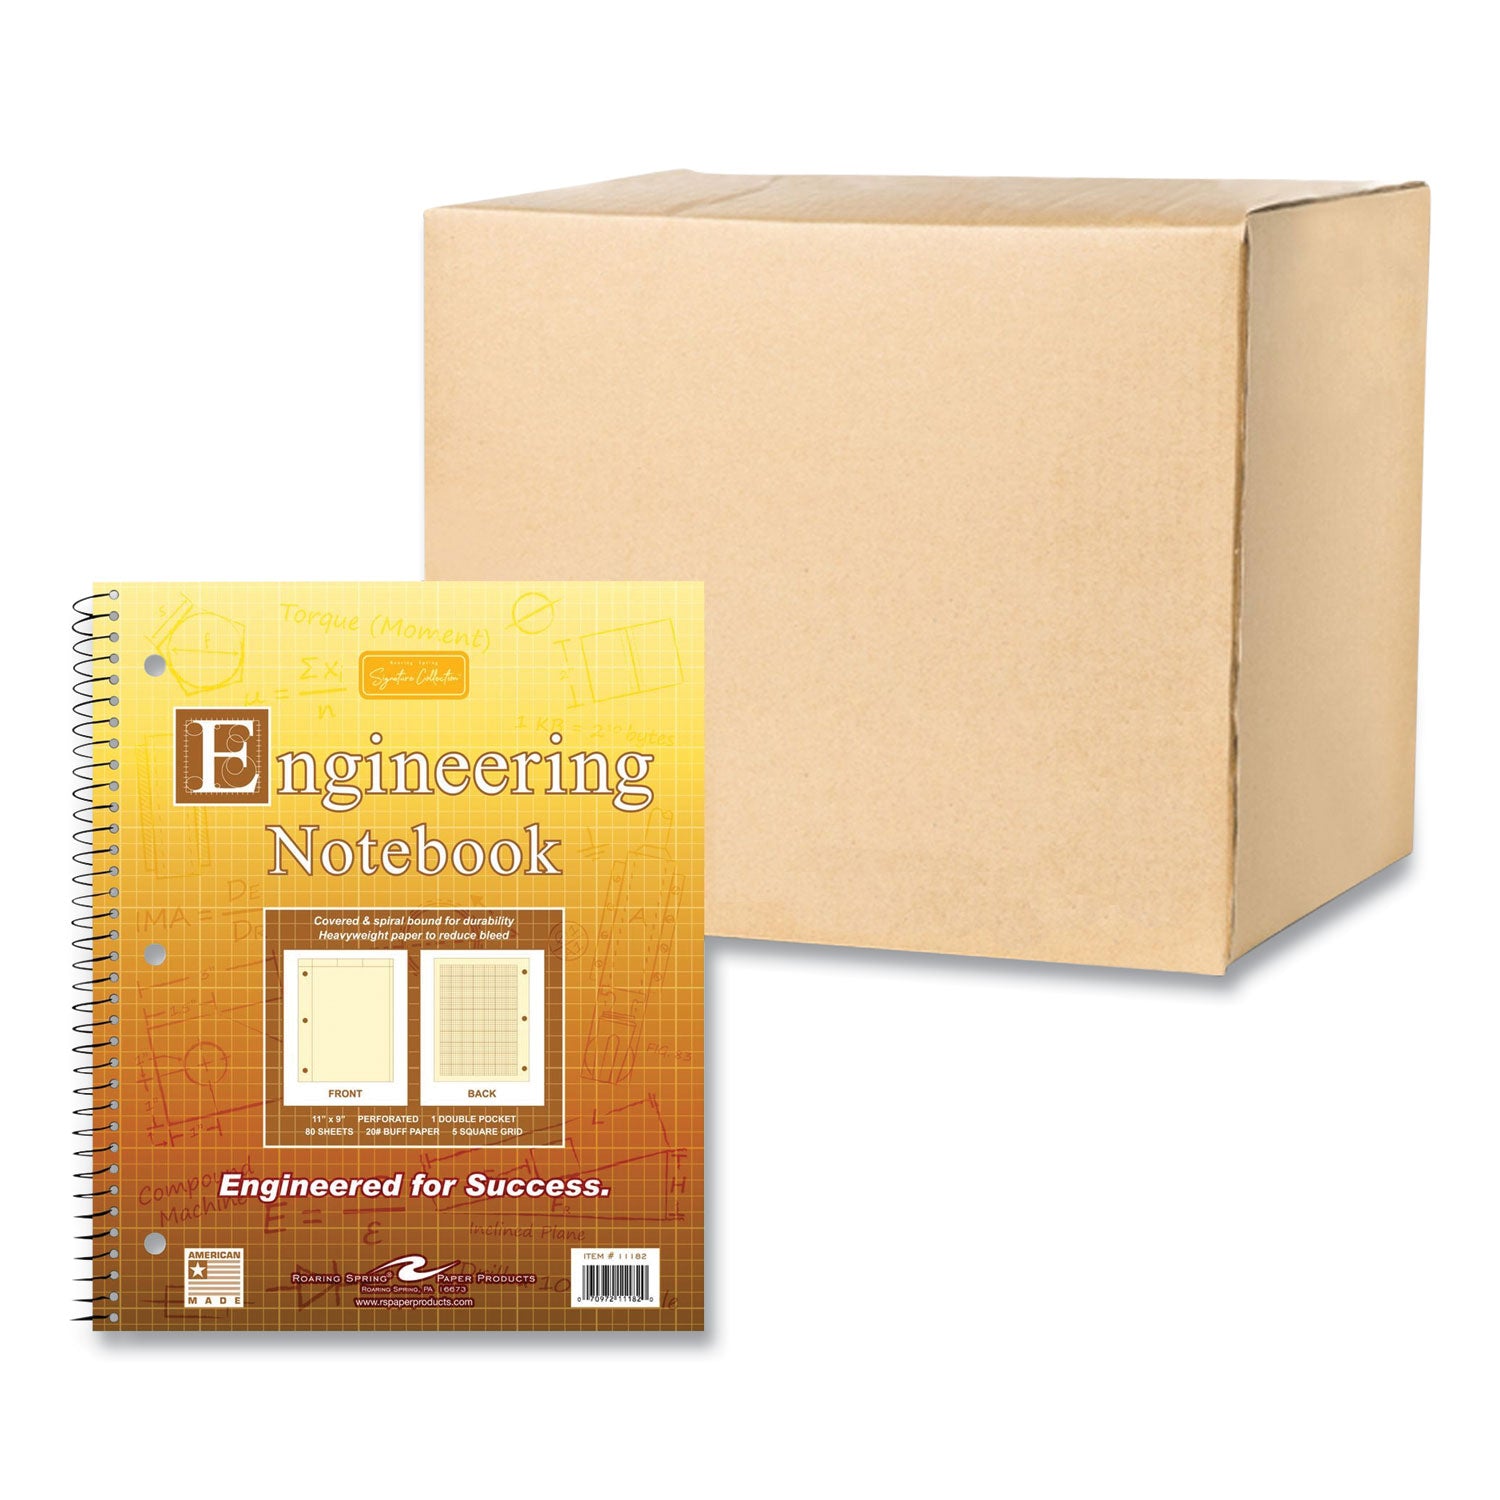 wirebound-engineering-notebook-20-lb-paper-stock-buff-cover-80-buff-11-x-85-sheets-24-carton-ships-in-4-6-business-days_roa13182cs - 5